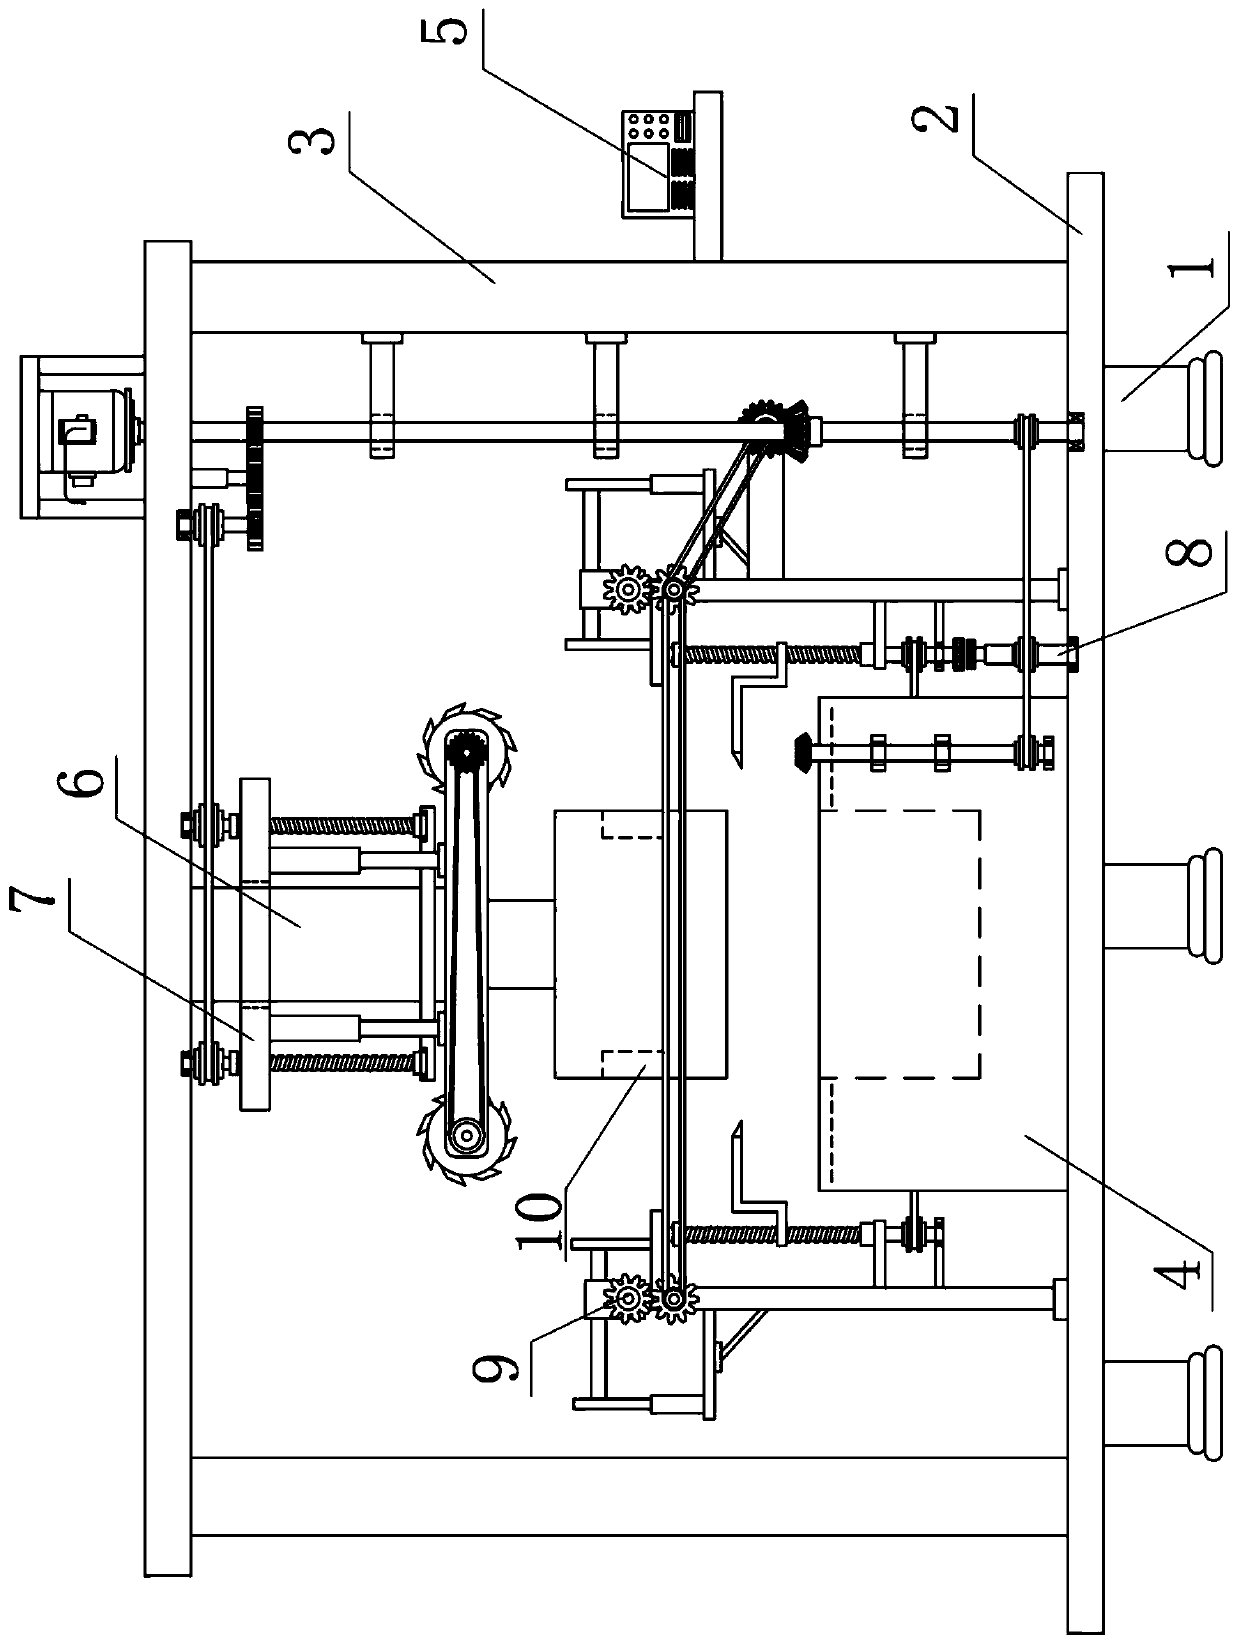 Injection molding processing device